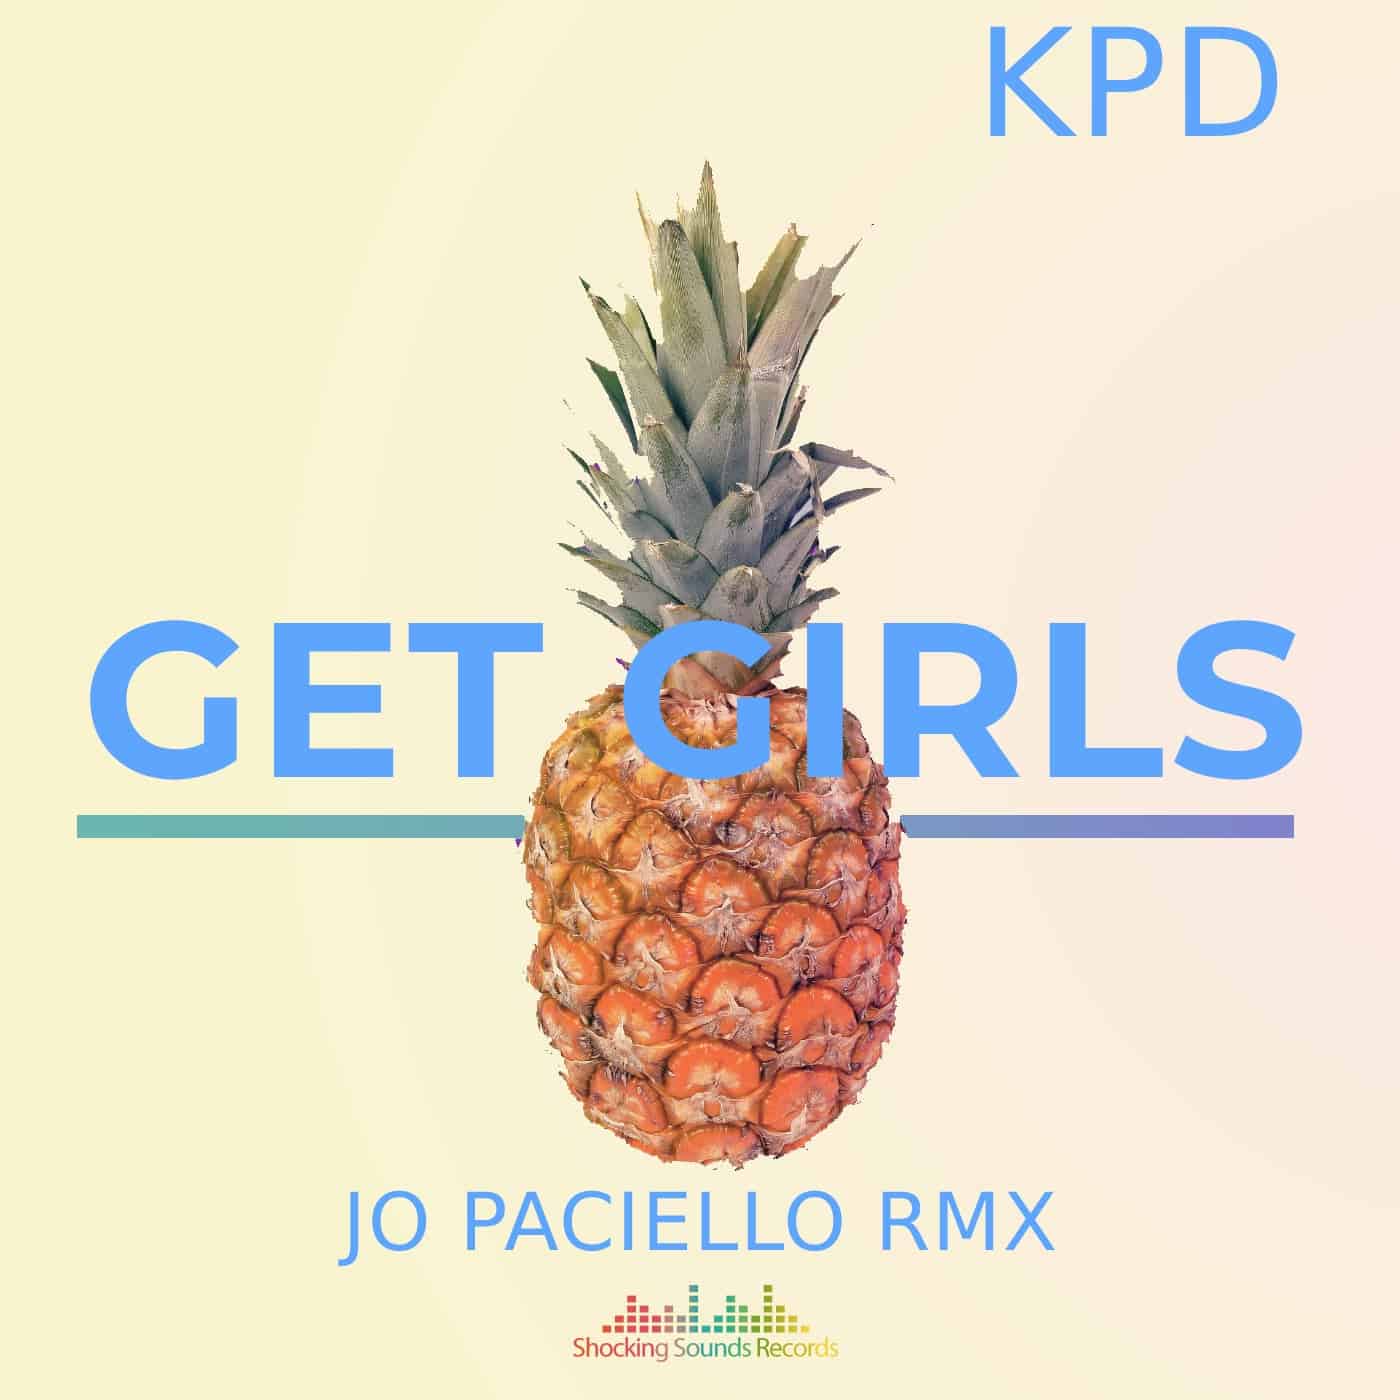 image cover: Get Girls (Jo Paciello Remix) by KPD on Shocking Sounds Records